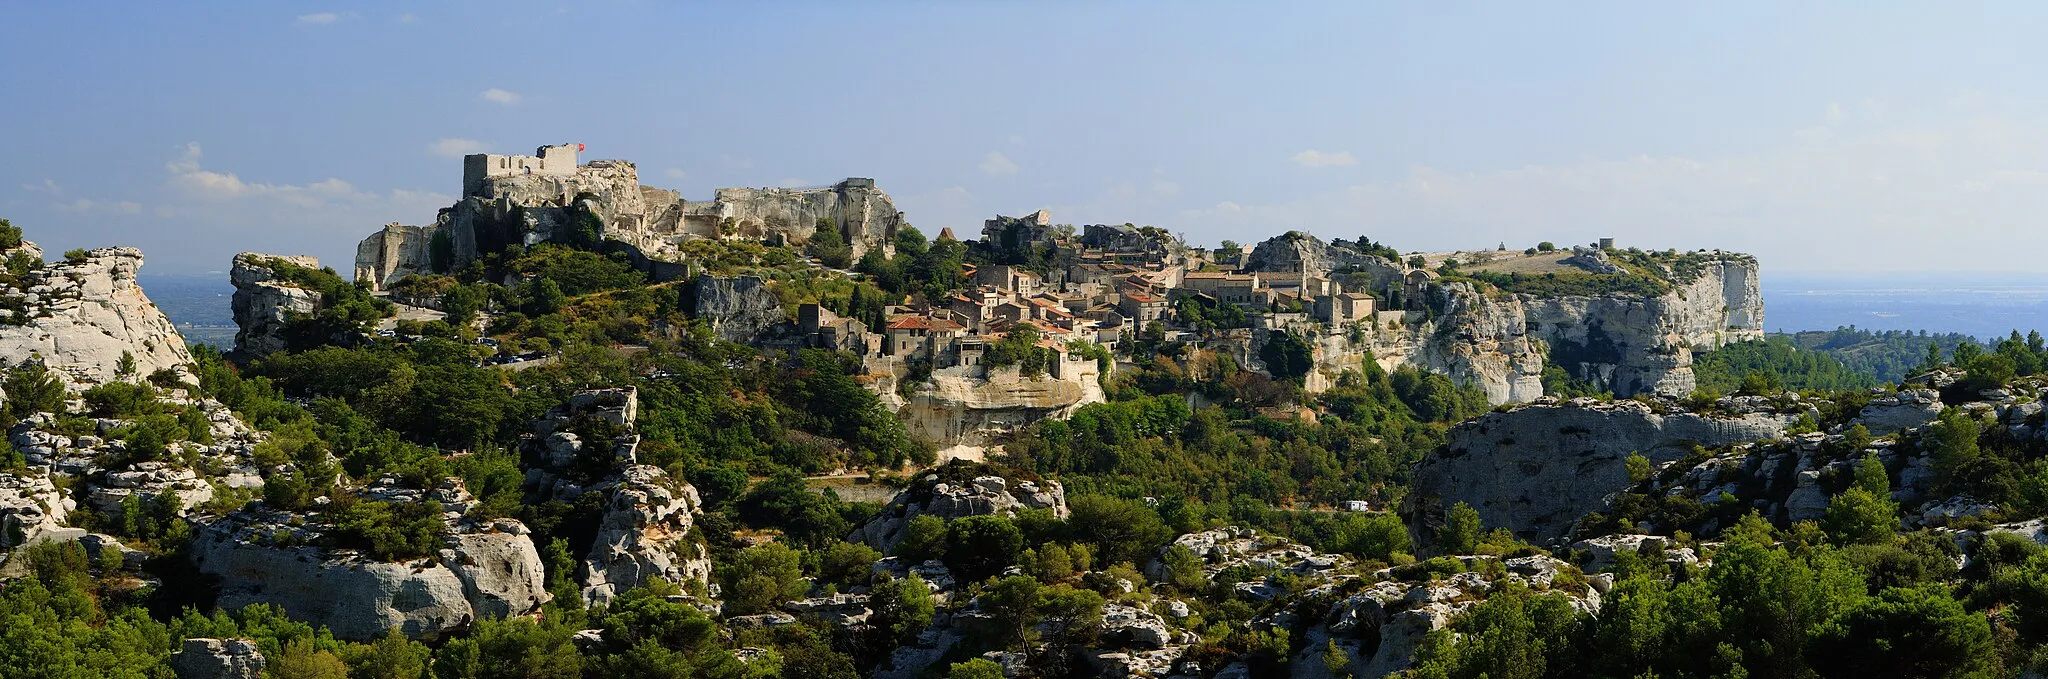 Photo showing: Les Baux-de-Provence village, seen from the D27 road, on the North-West side. This panorama is a mosaic of 2x4 landscape pictures taken at 105mm (168mm in 35mm equiv.), f/8.0, 1/125sec and ISO 100. Stitching was done with Hugin and Enblend and resulting image was postprocessed in Gimp.